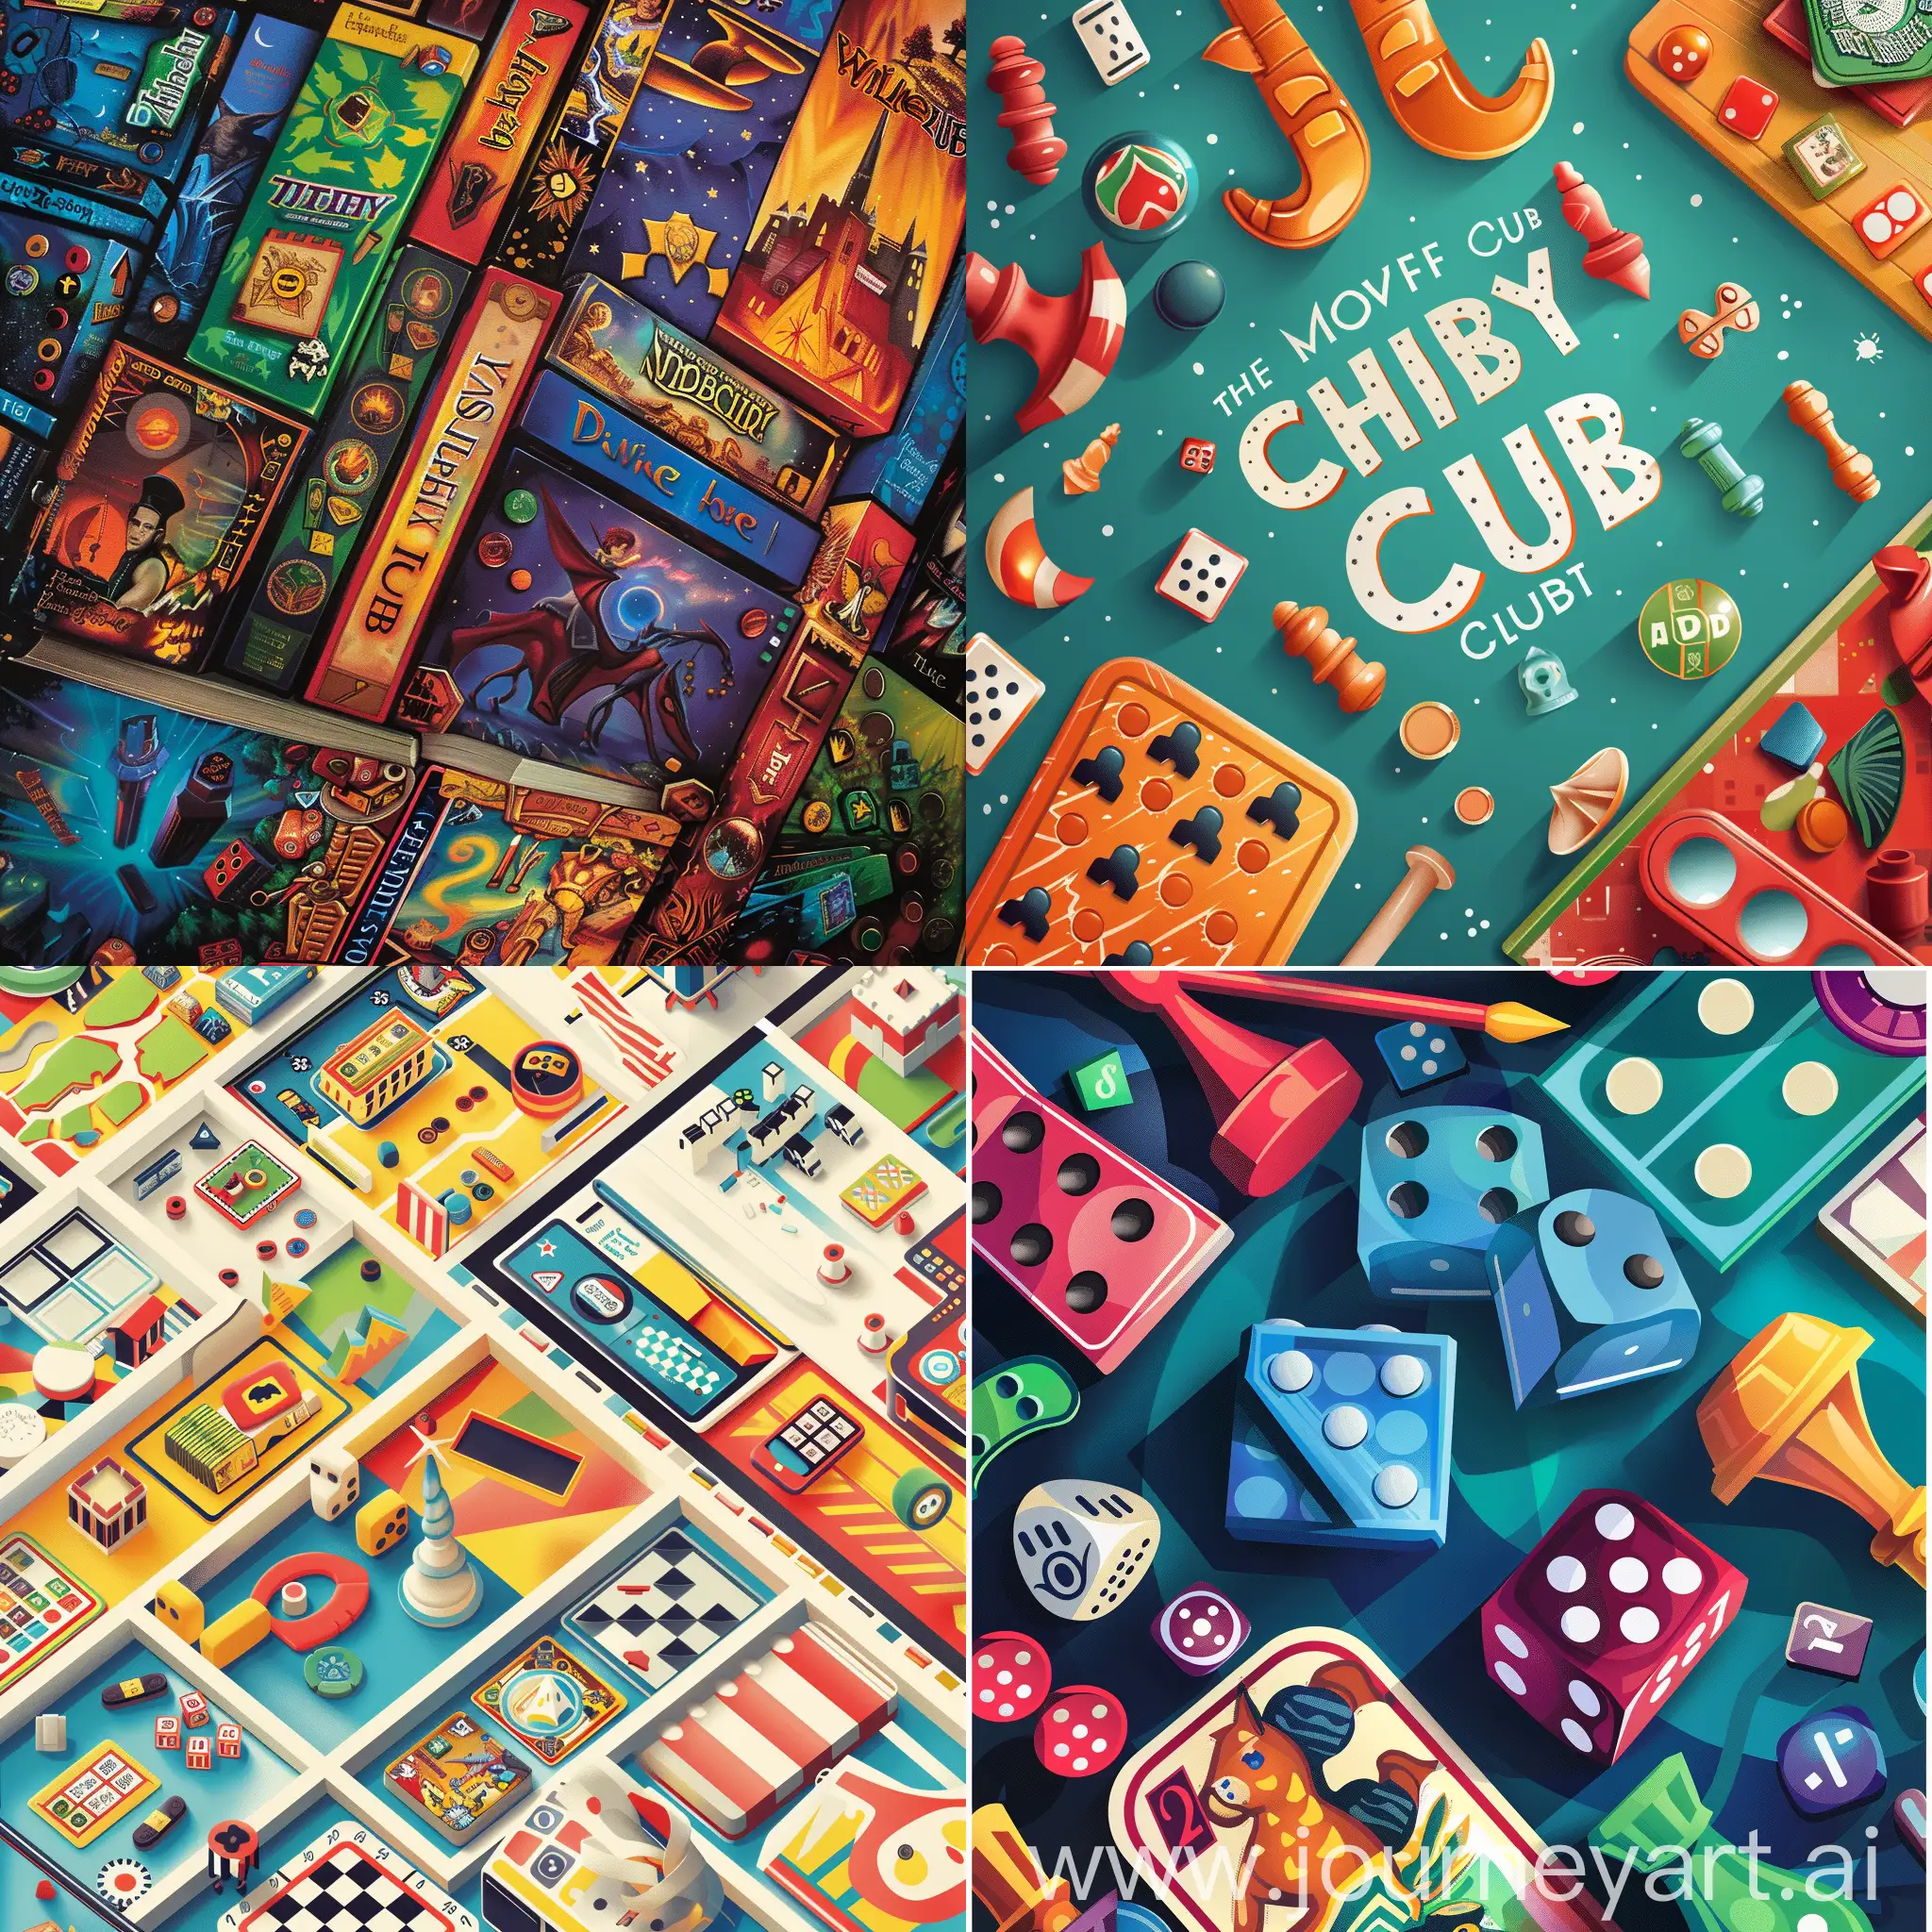 I need a board game club image like a poster for advertising . Unique, colorful.